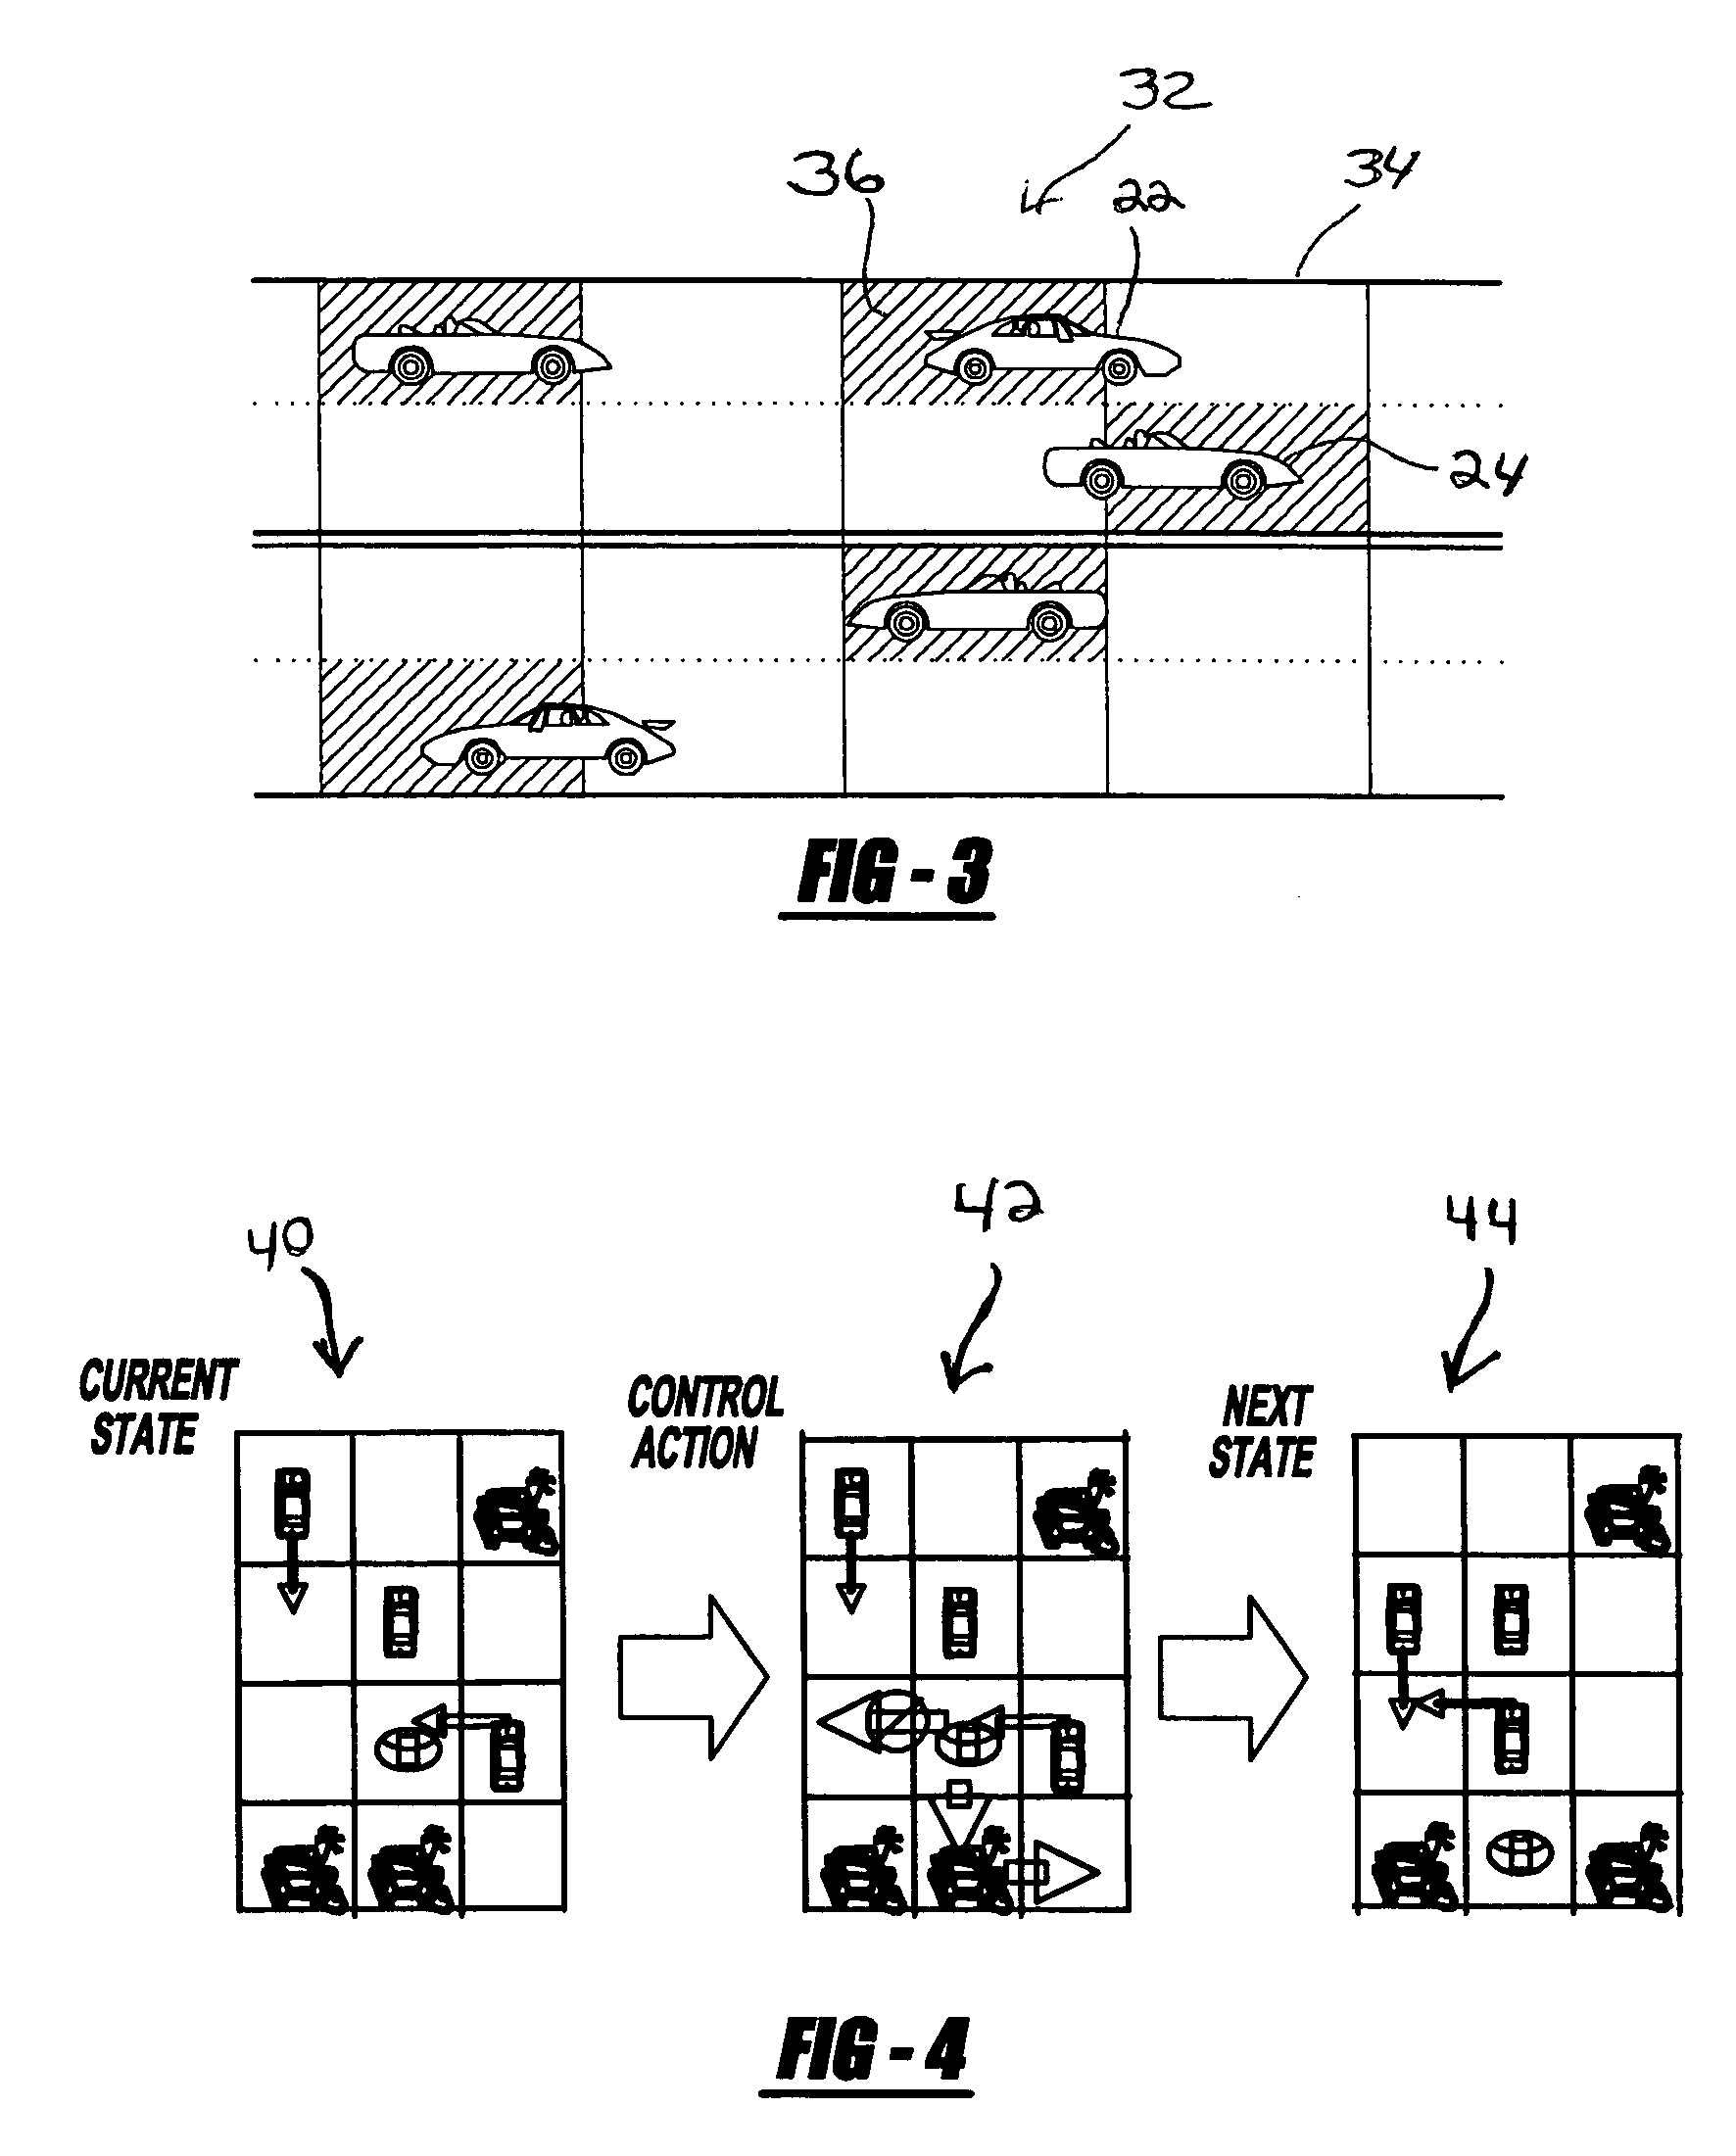 System and method of collision avoidance using intelligent navigation